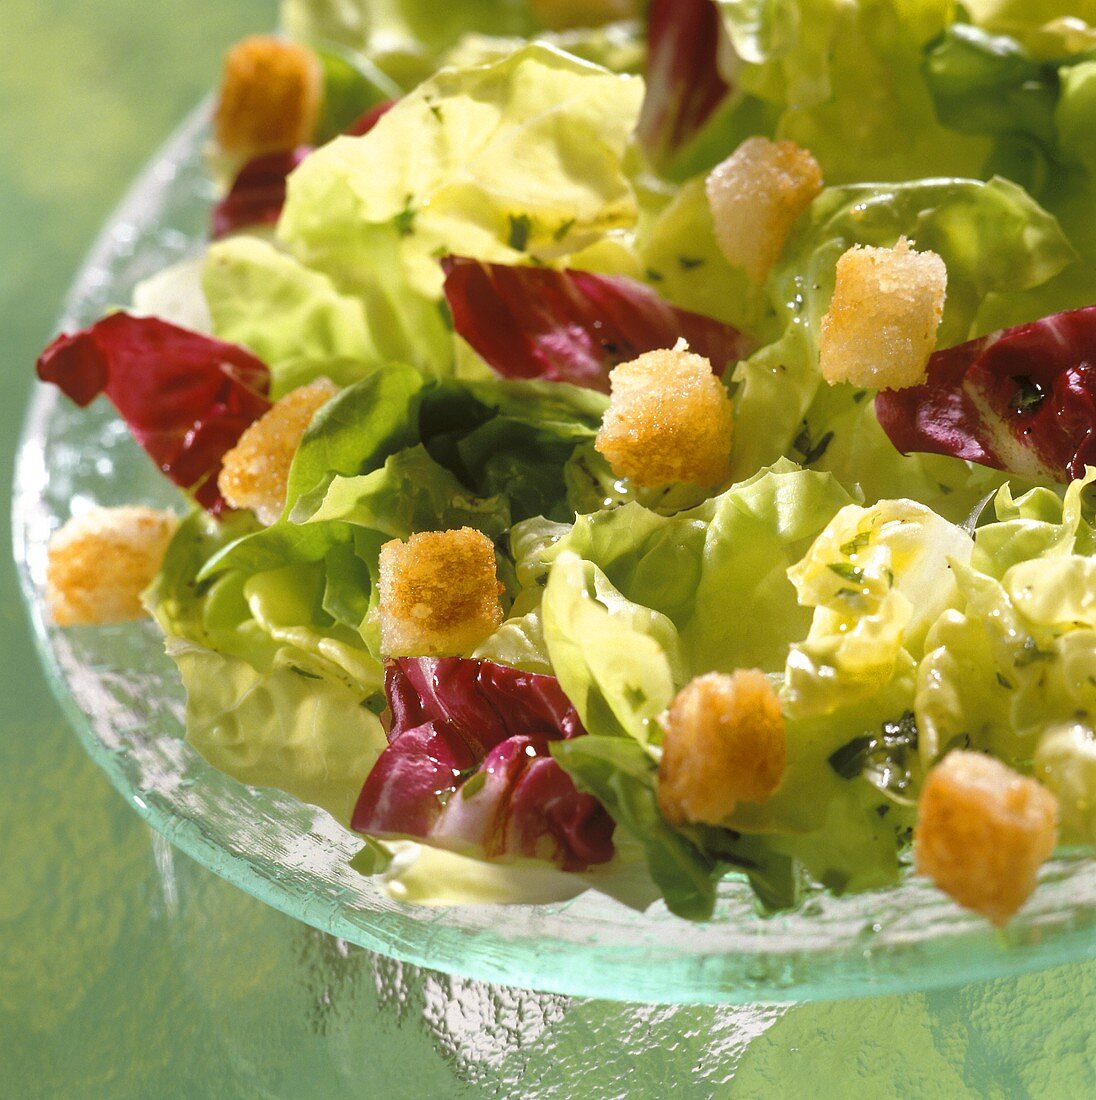 Mixed salad leaves with croutons and herb dressing